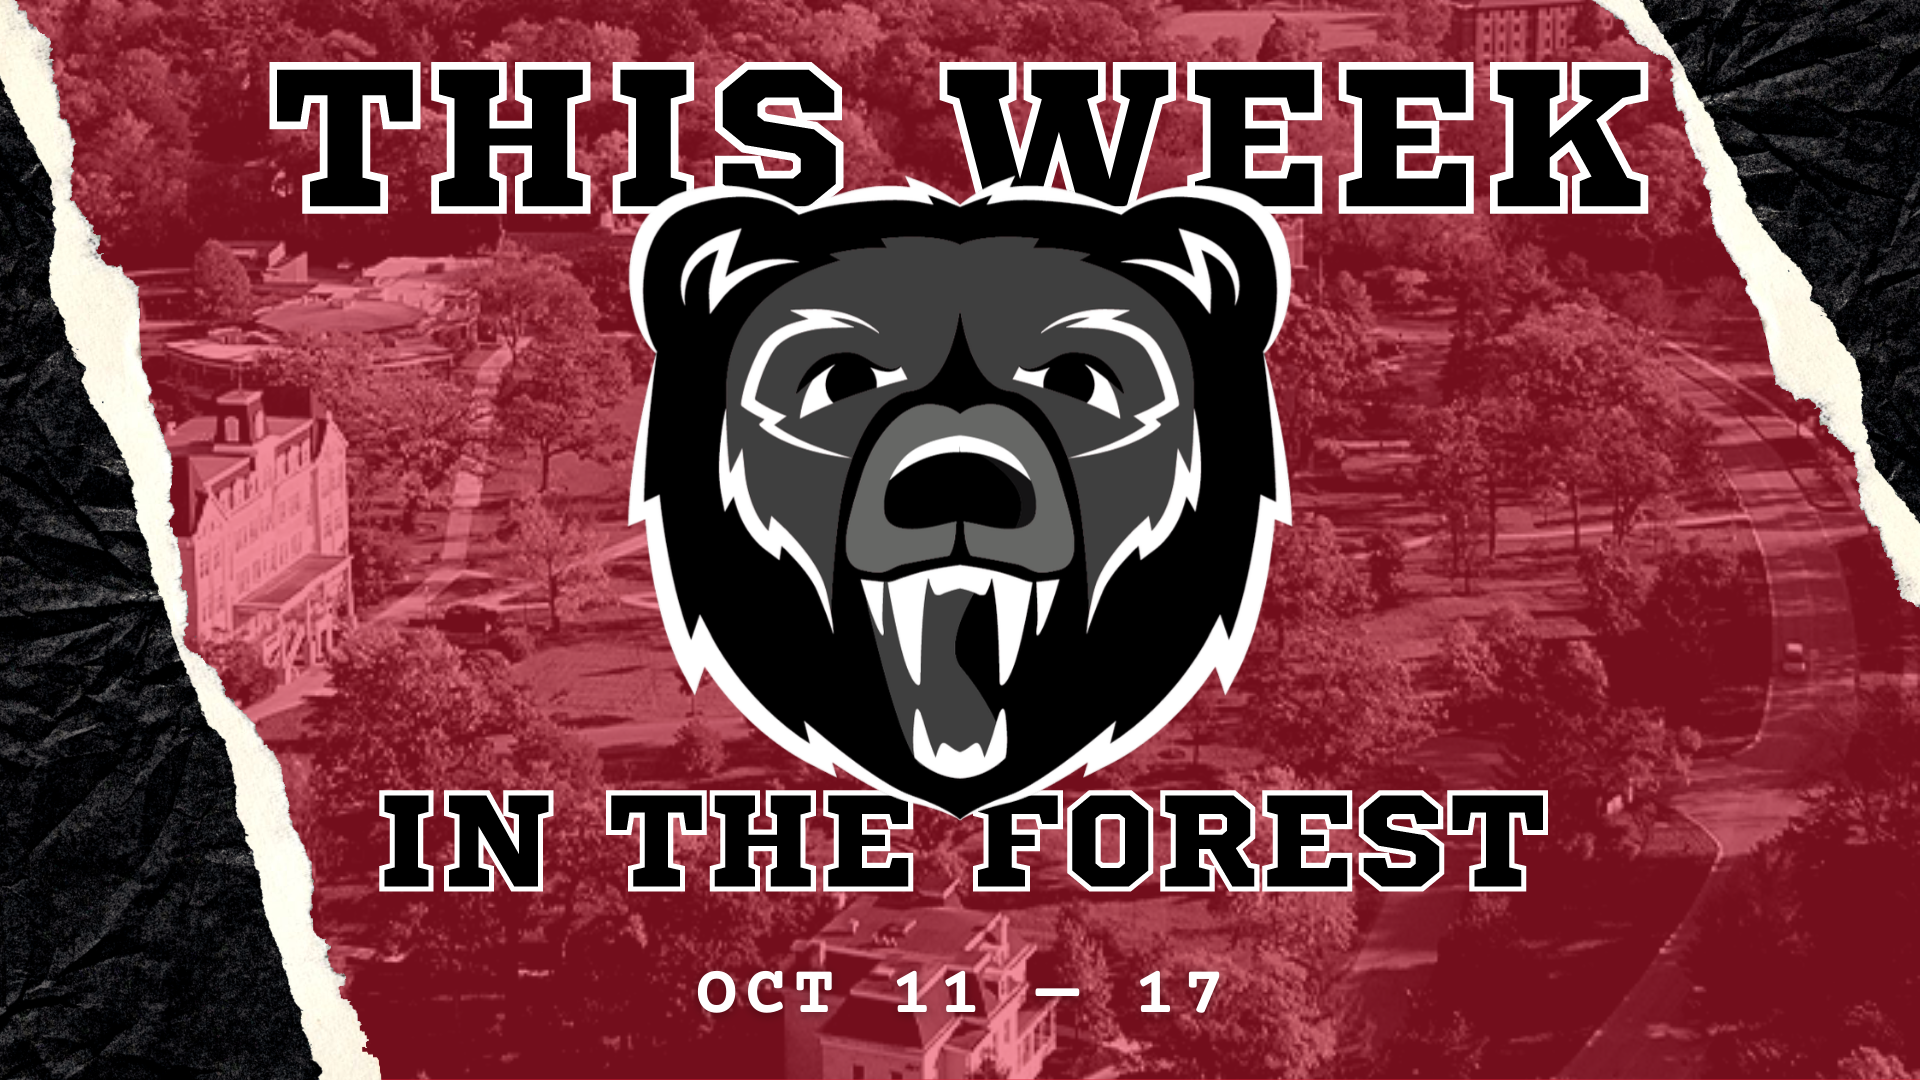 This Week in the Forest: October 11-17